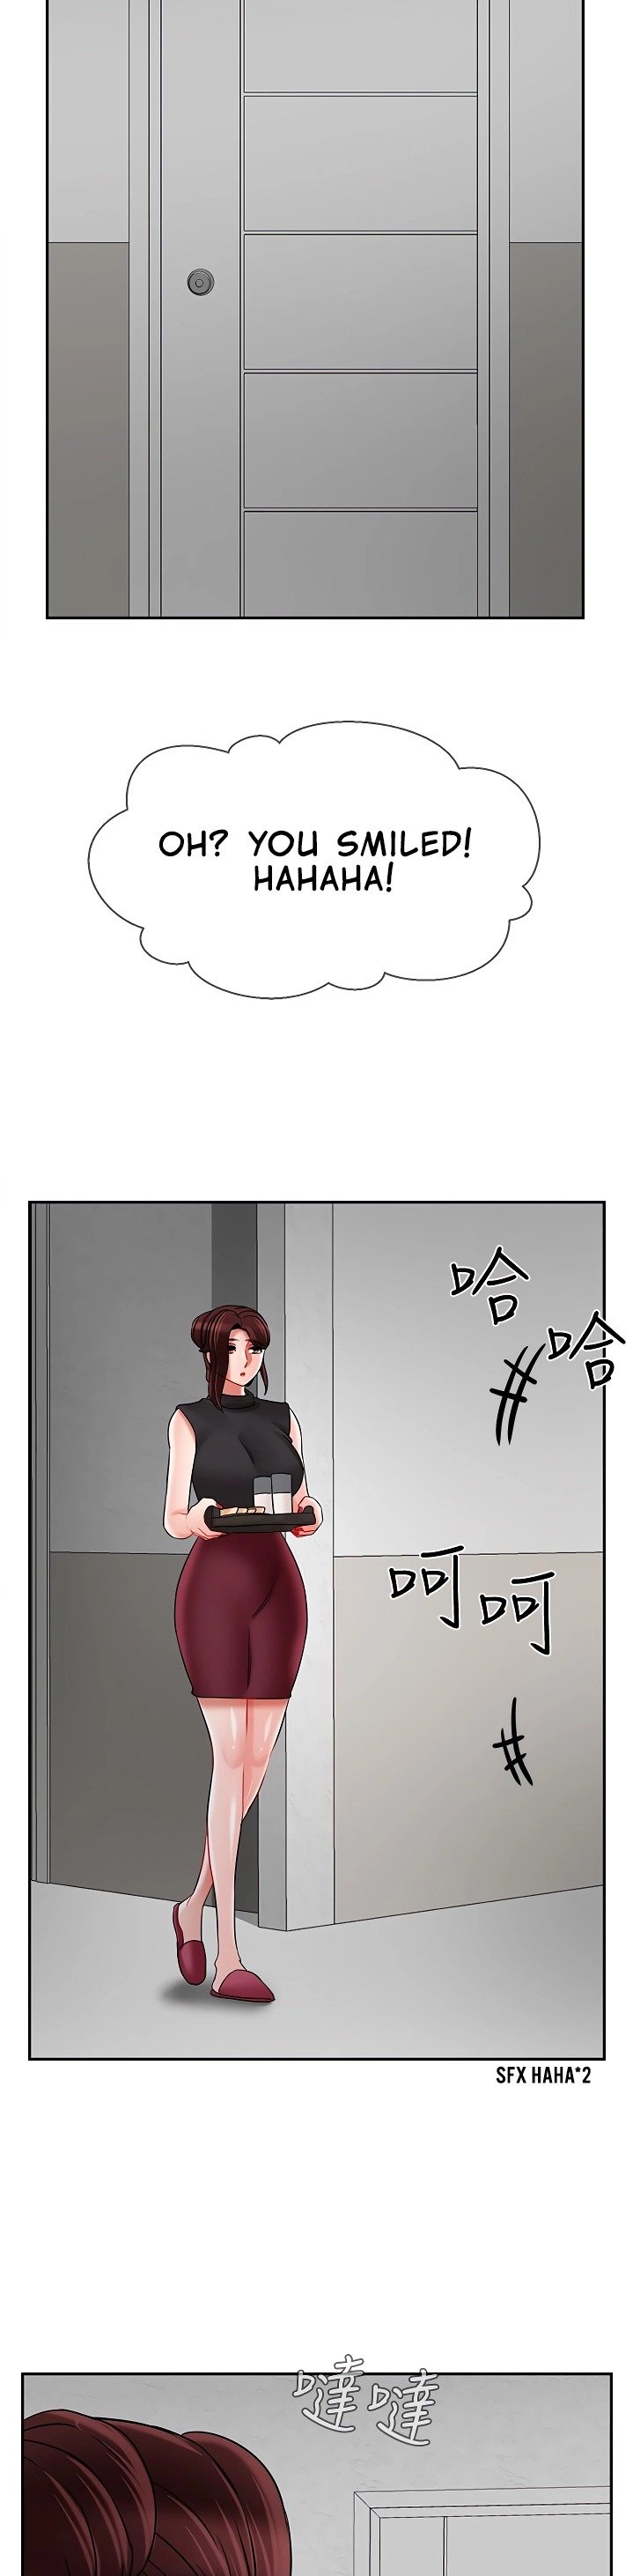 physical-classroom-chap-30-22